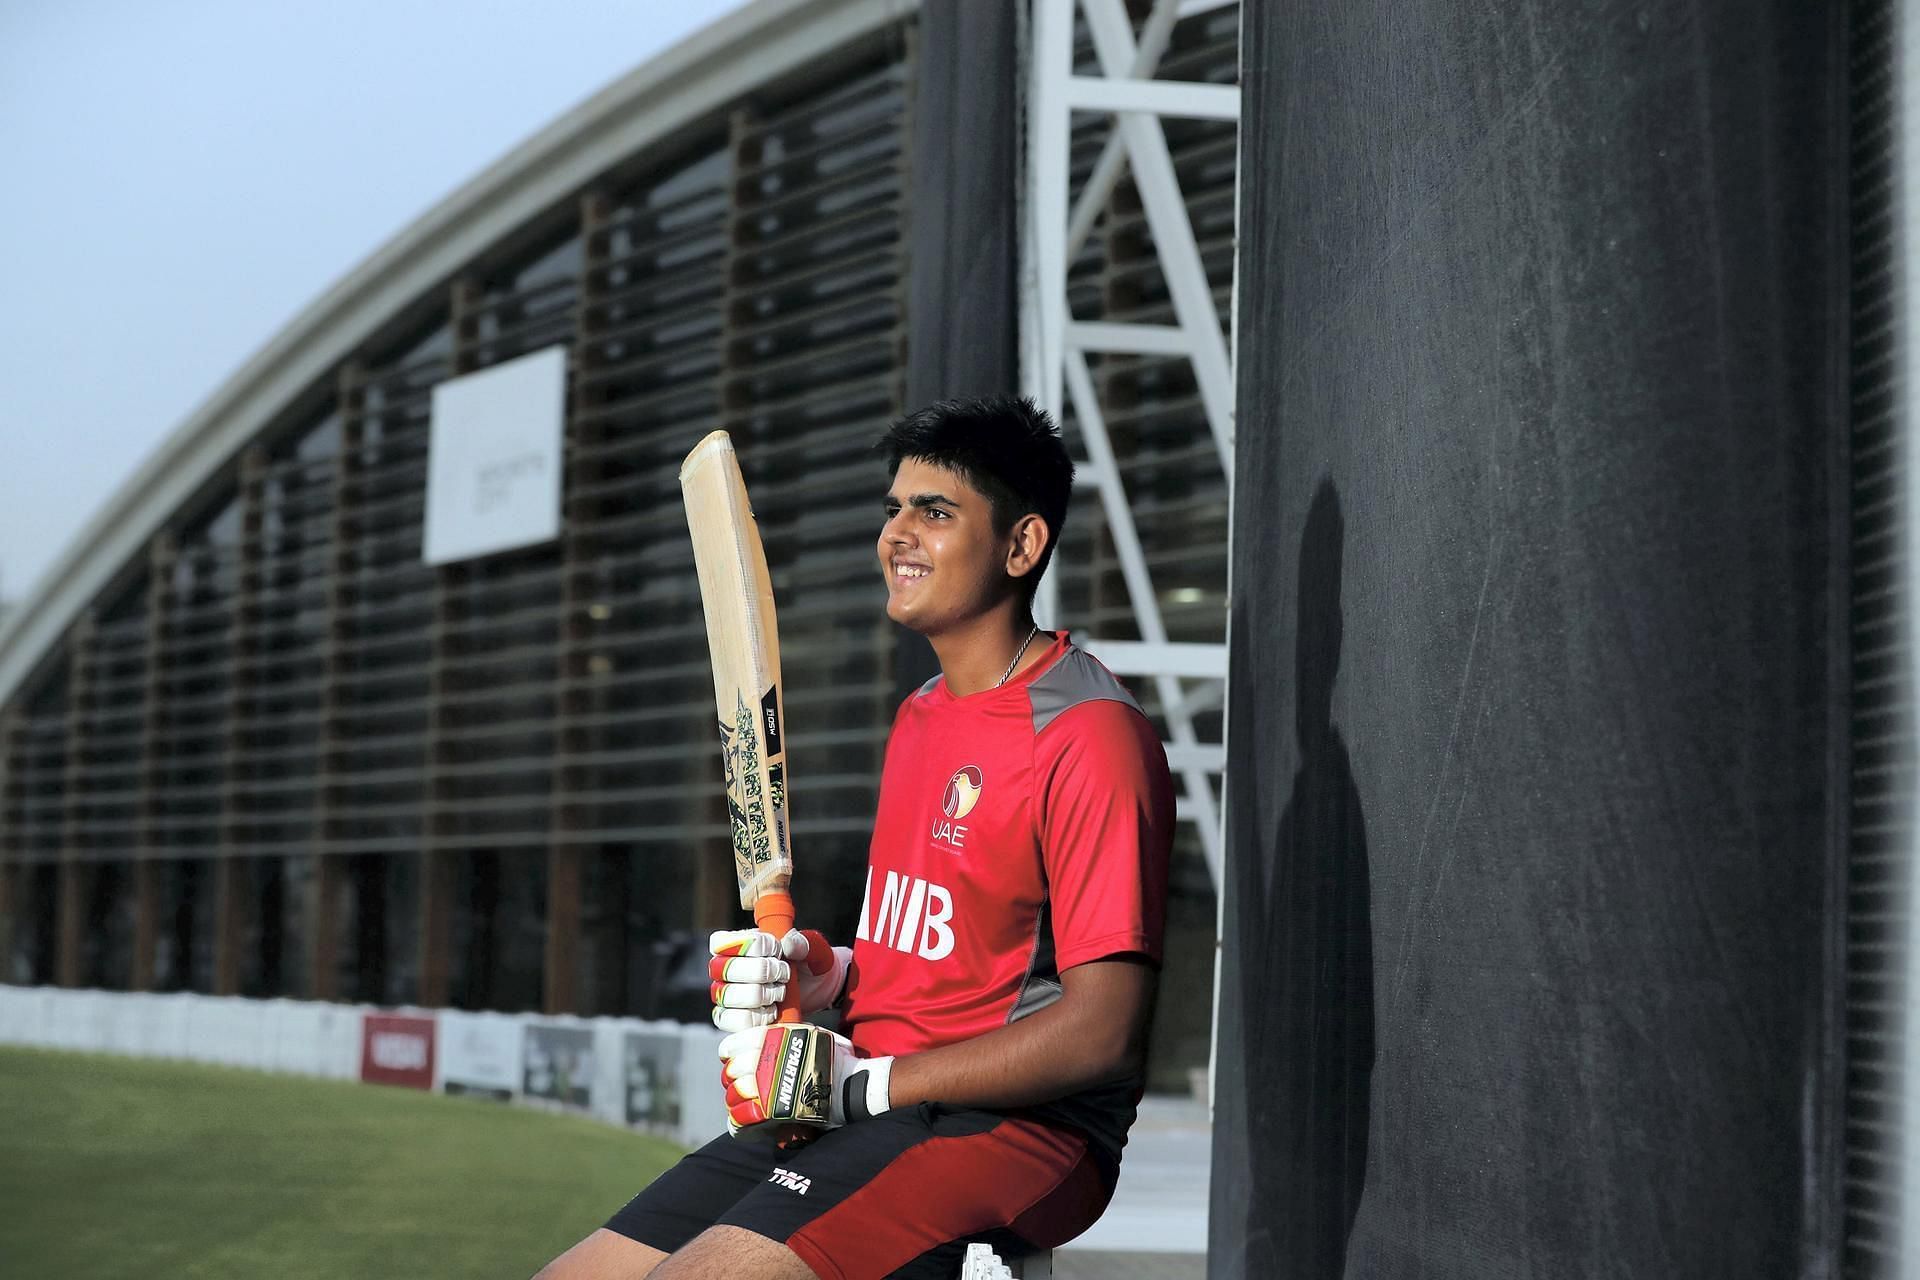 Aryan Lakra is 21 years old and has experience of playing international cricket.